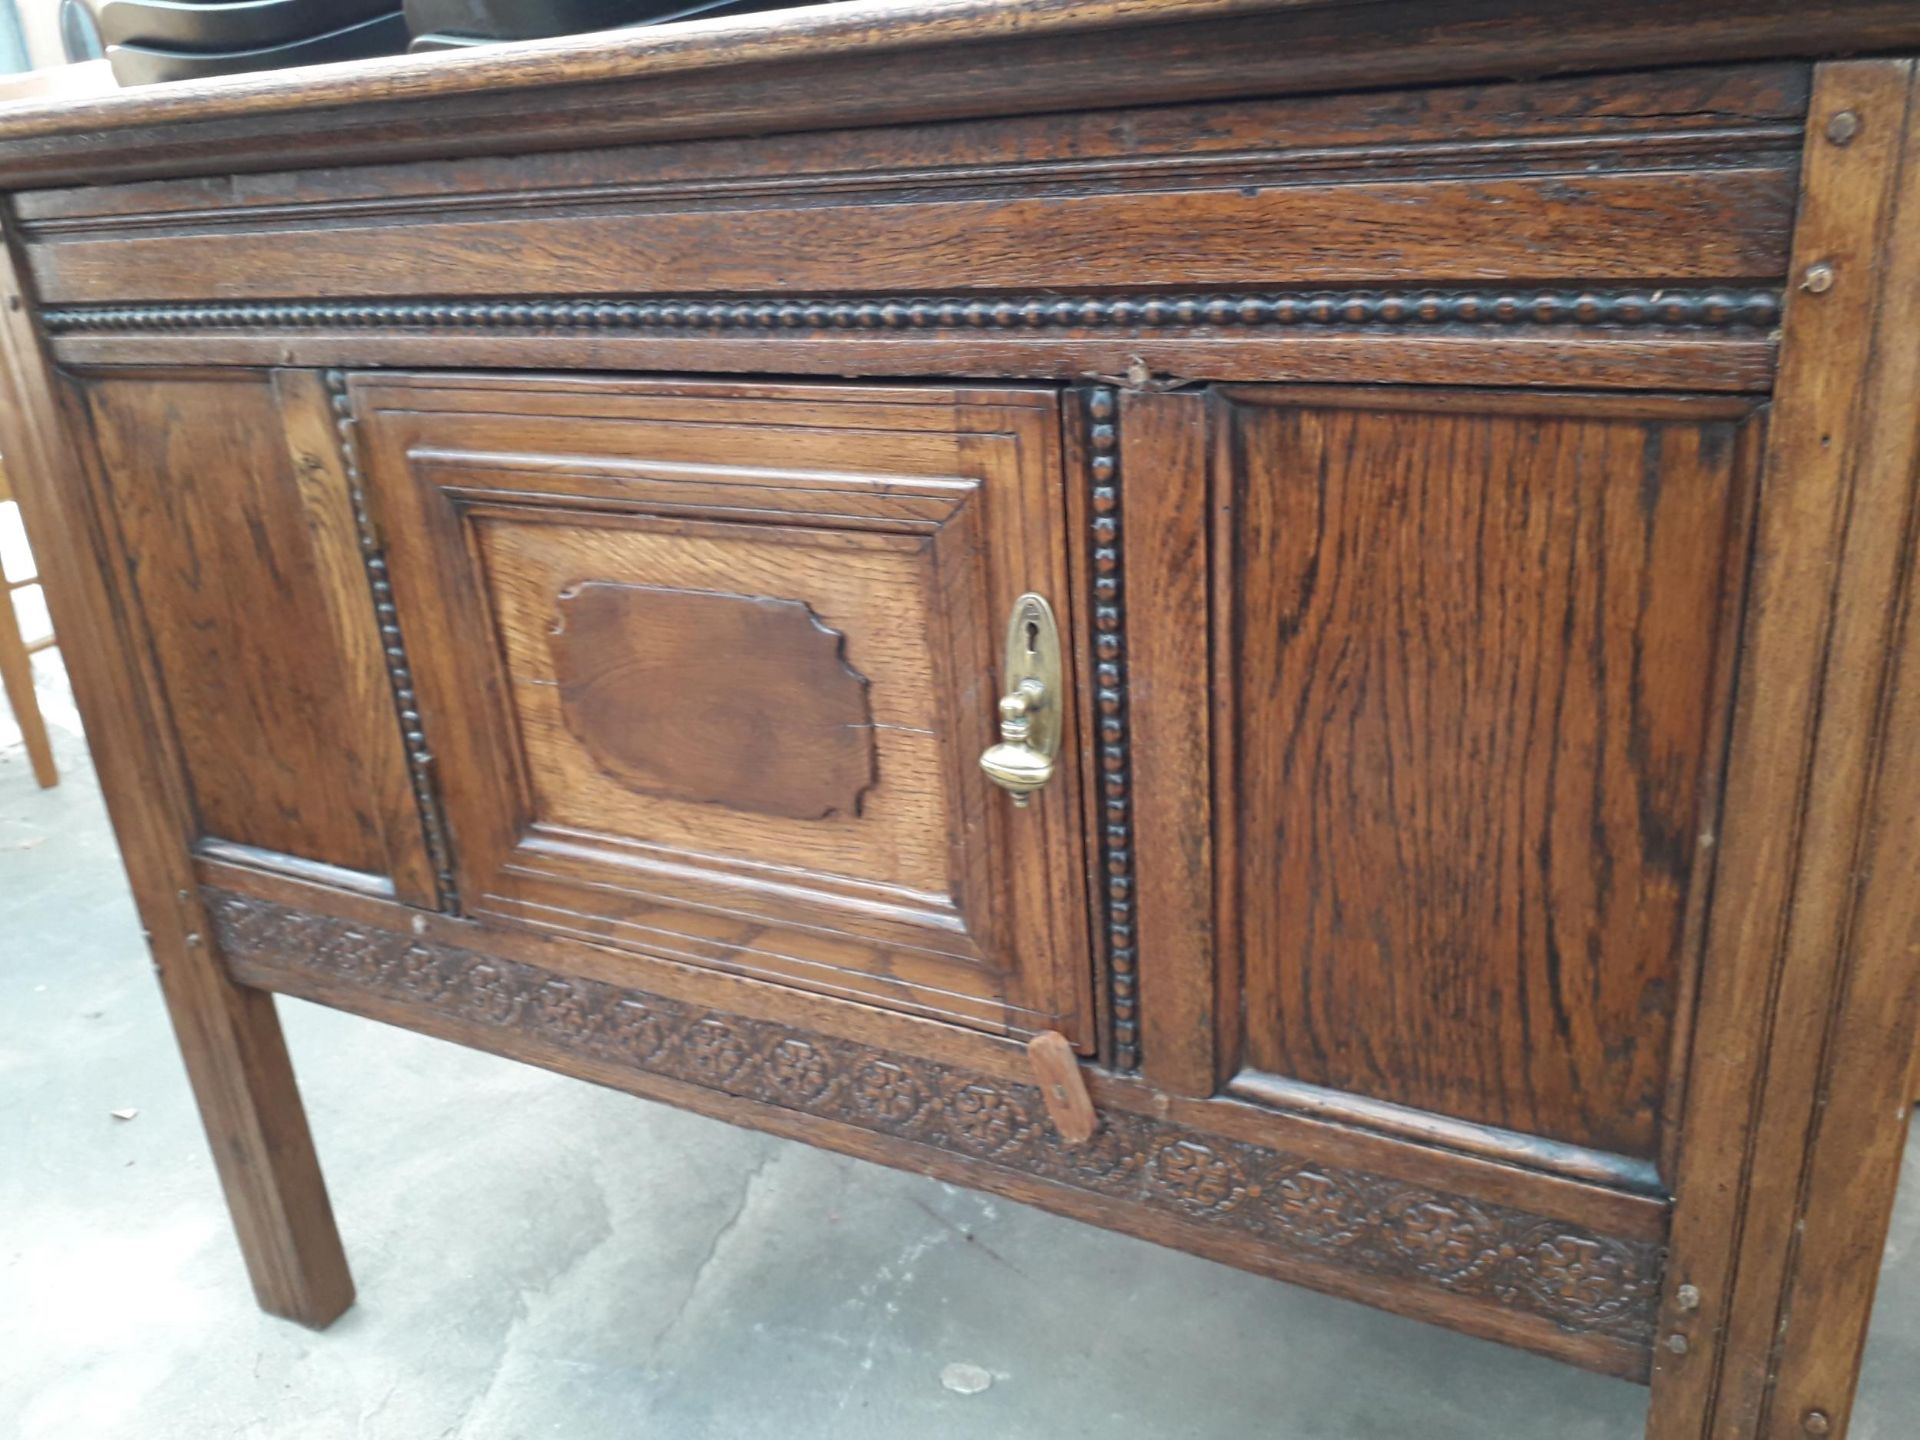 AN EARLY 20TH CENTURY OAK SIDE-CABINET WITH SINGLE DRAWER AND CARVED PANELS, 44" WIDE - Image 3 of 3